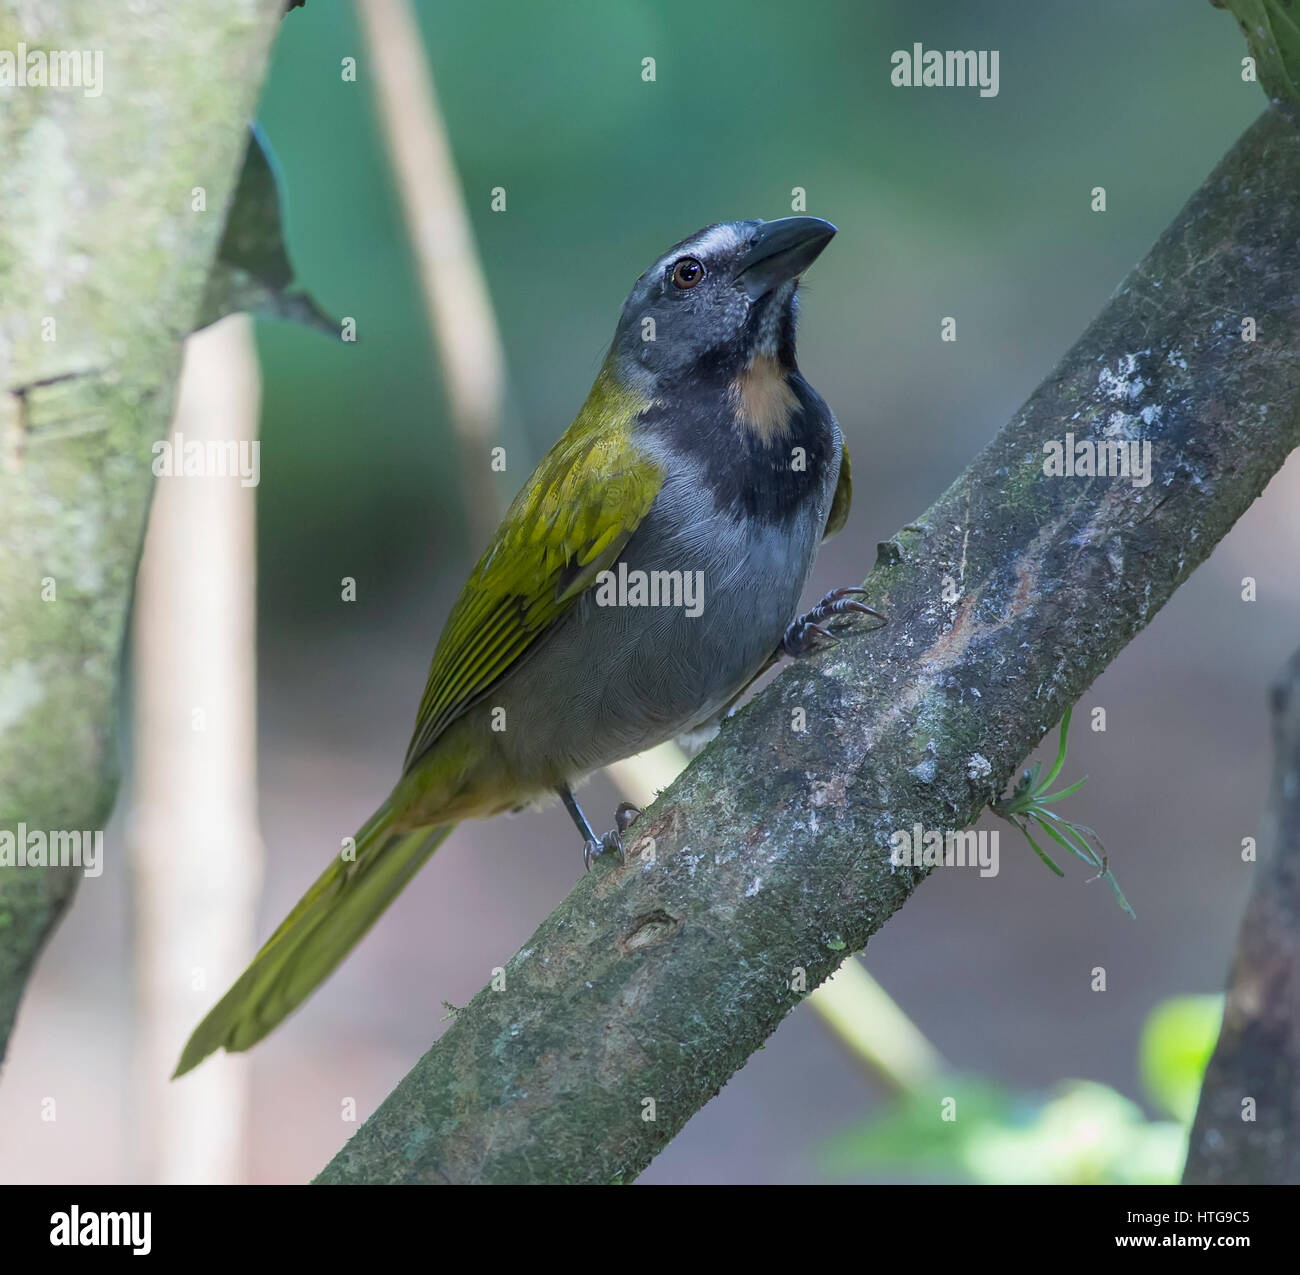 Buff-throated Saltator perched on a branch looking up Stock Photo